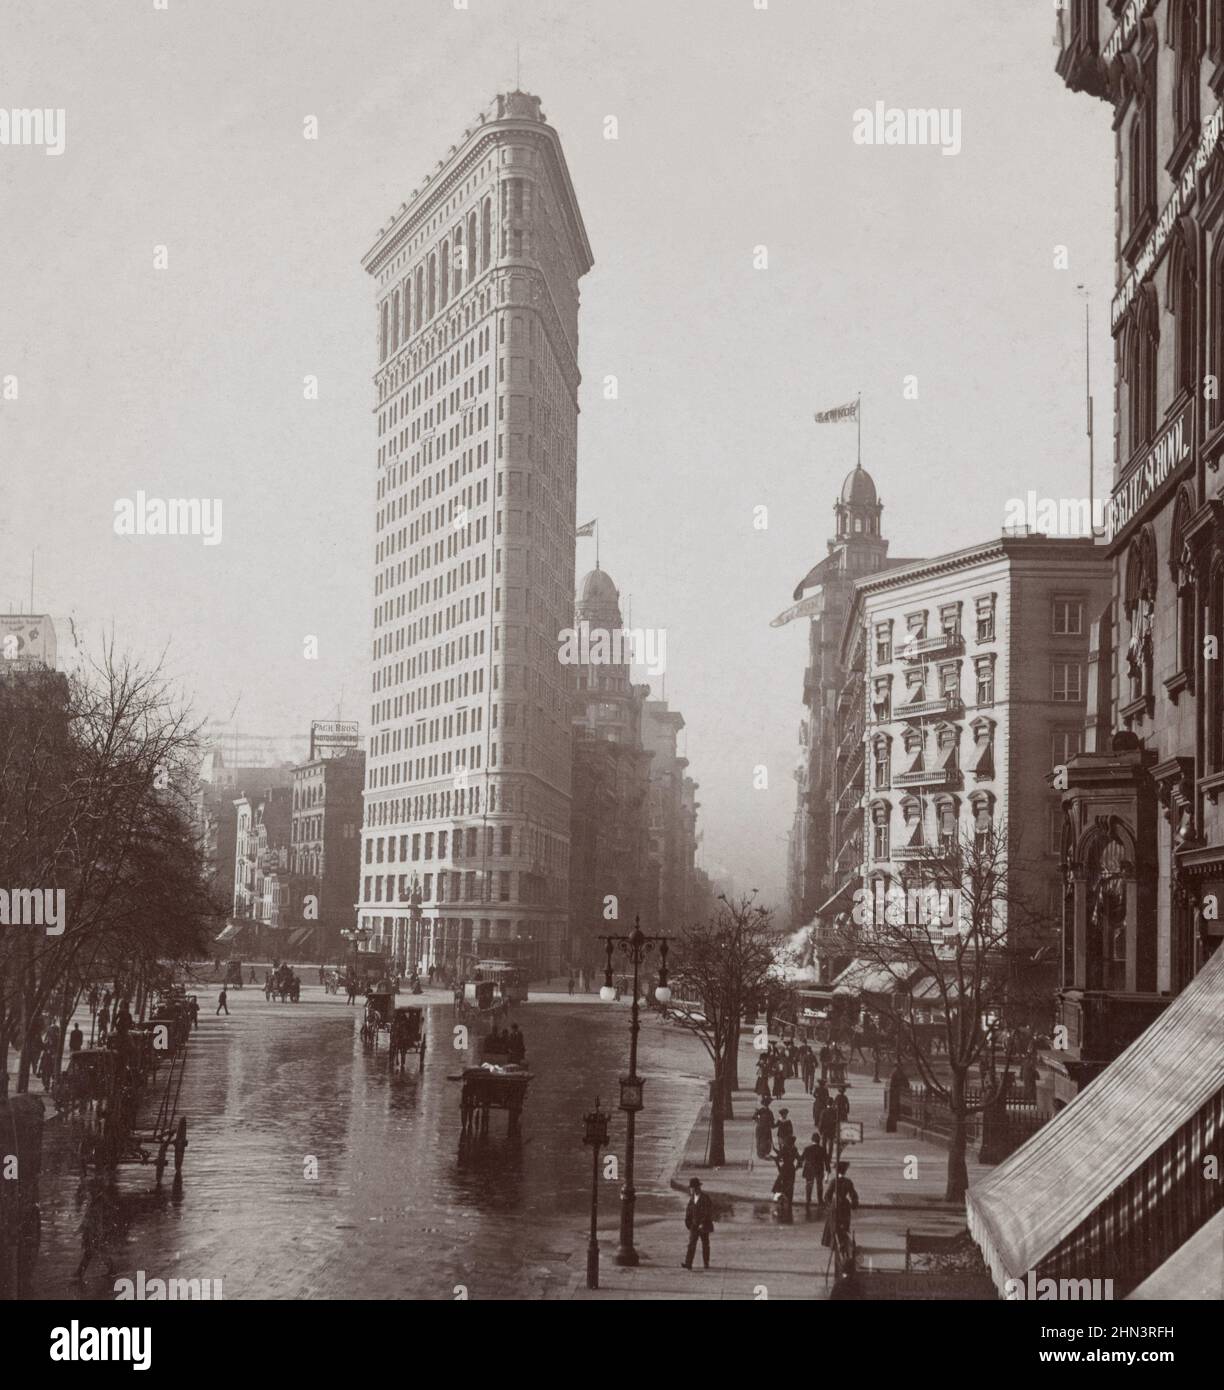 Vintage photo of 'Flat Iron' Building, Fifth Avenue and Broadway, New York, N.Y., U.S.A. 1900s Stock Photo